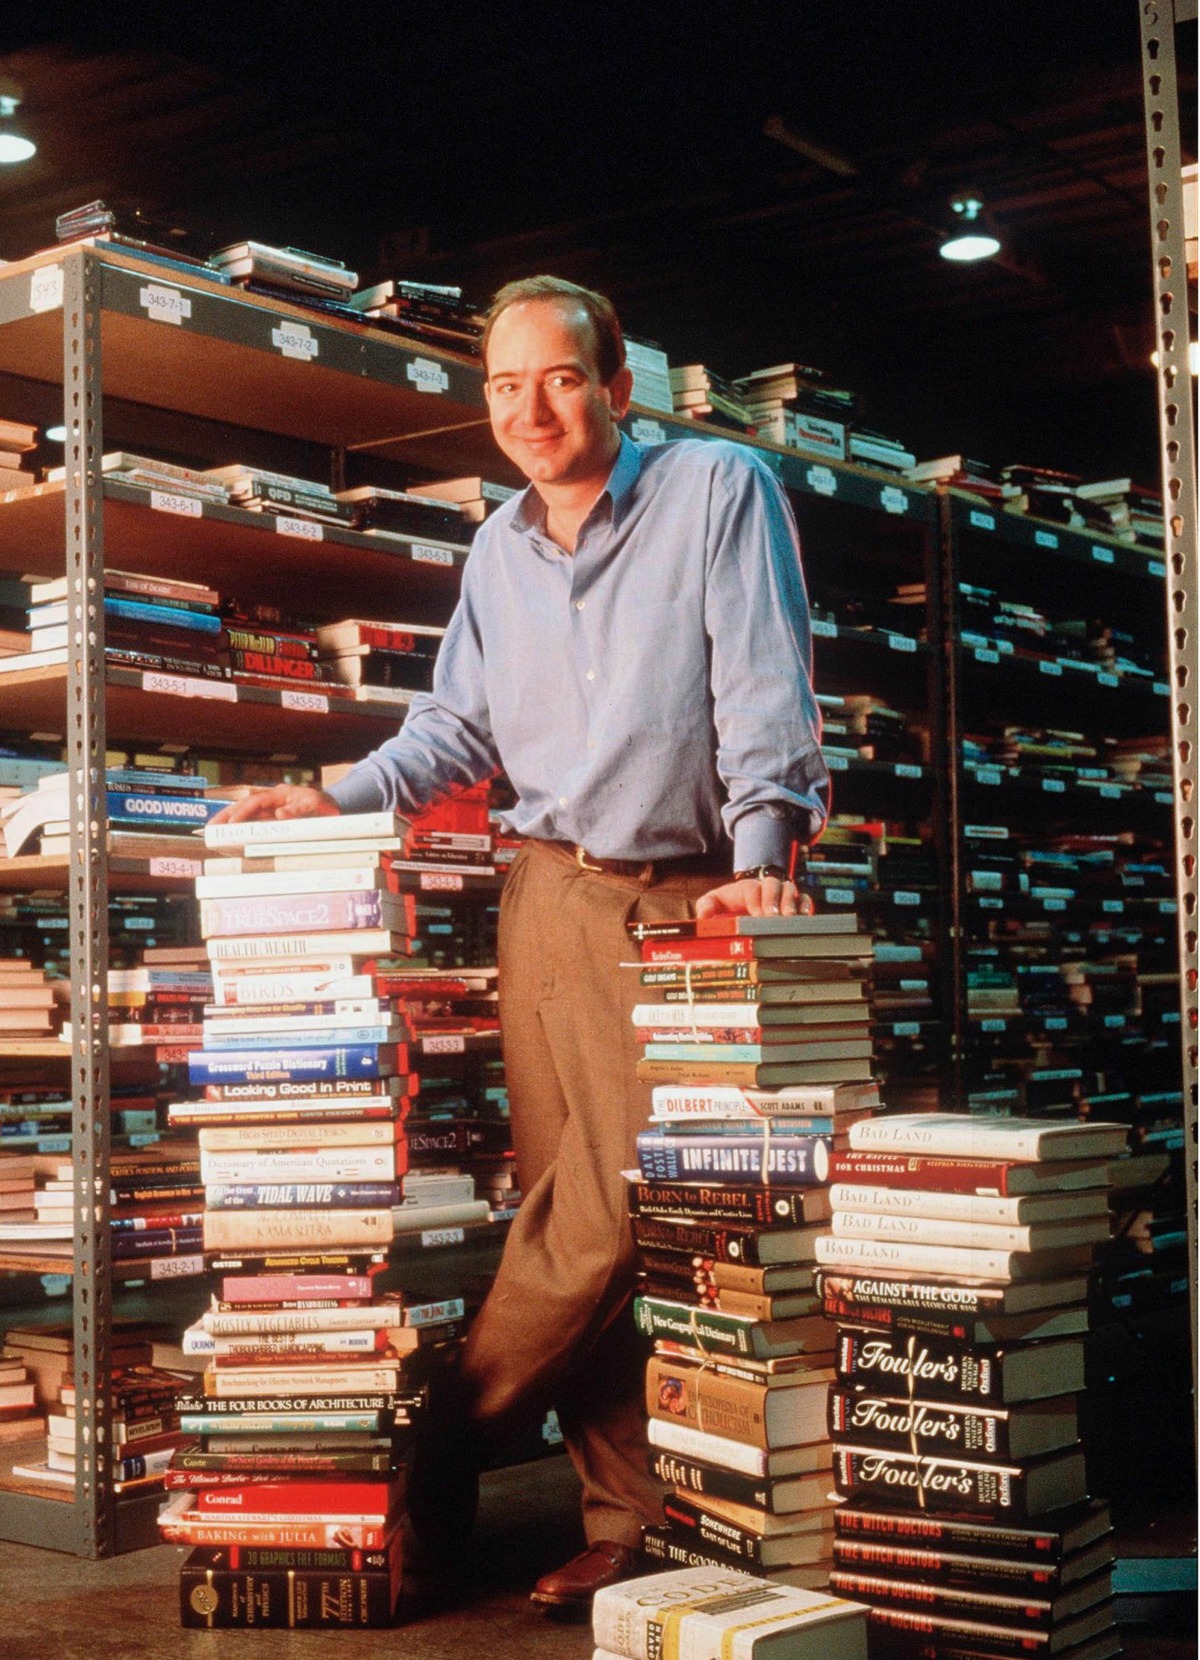 Jeff Bezos in 1997, three years after founding Amazon.